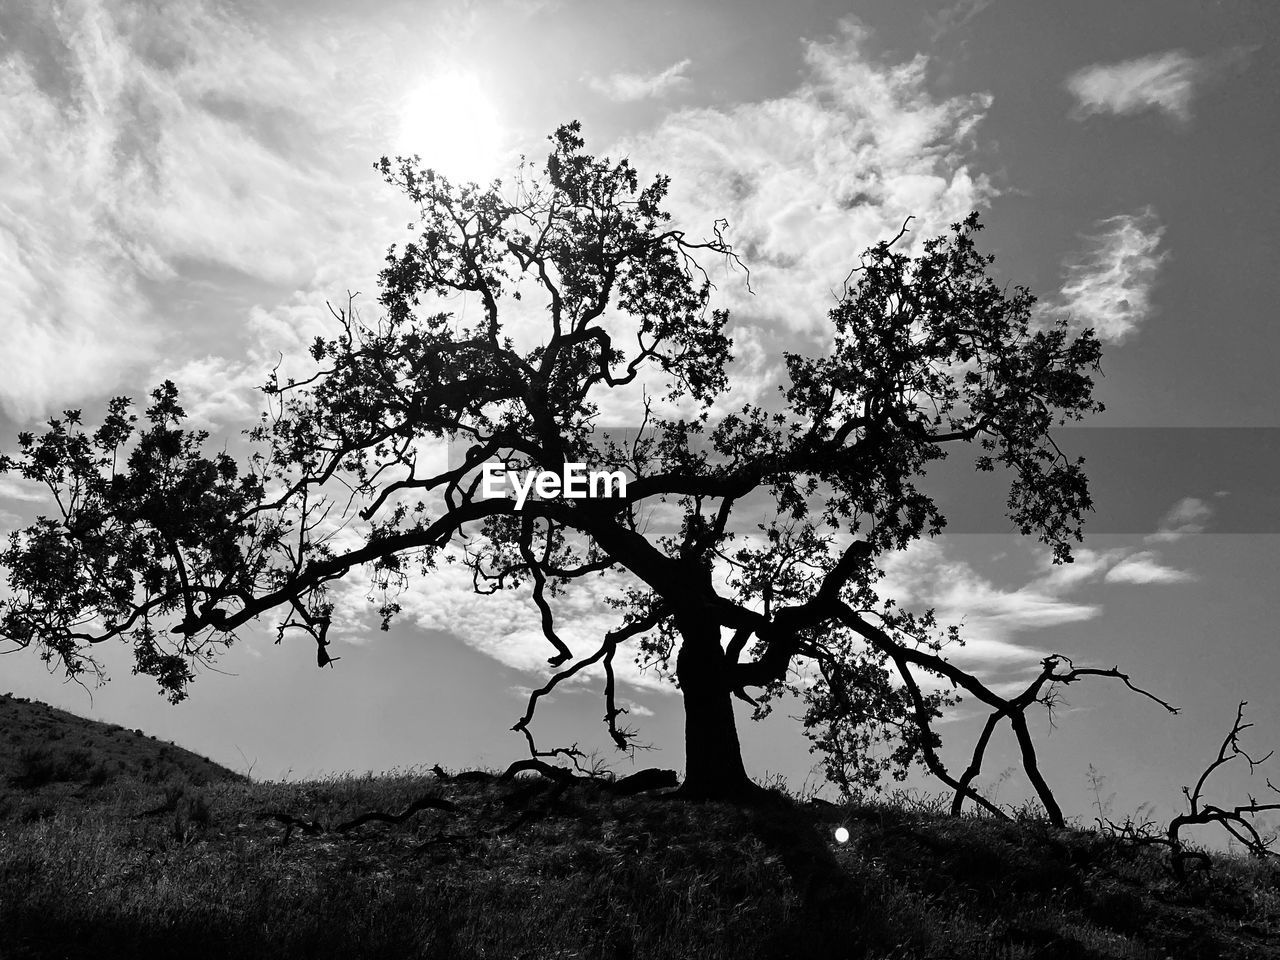 tree, black and white, sky, plant, nature, monochrome, monochrome photography, cloud, environment, landscape, beauty in nature, darkness, branch, scenics - nature, silhouette, land, no people, tranquility, outdoors, non-urban scene, mountain, flower, tranquil scene, leaf, sunlight, day, pinaceae, travel destinations